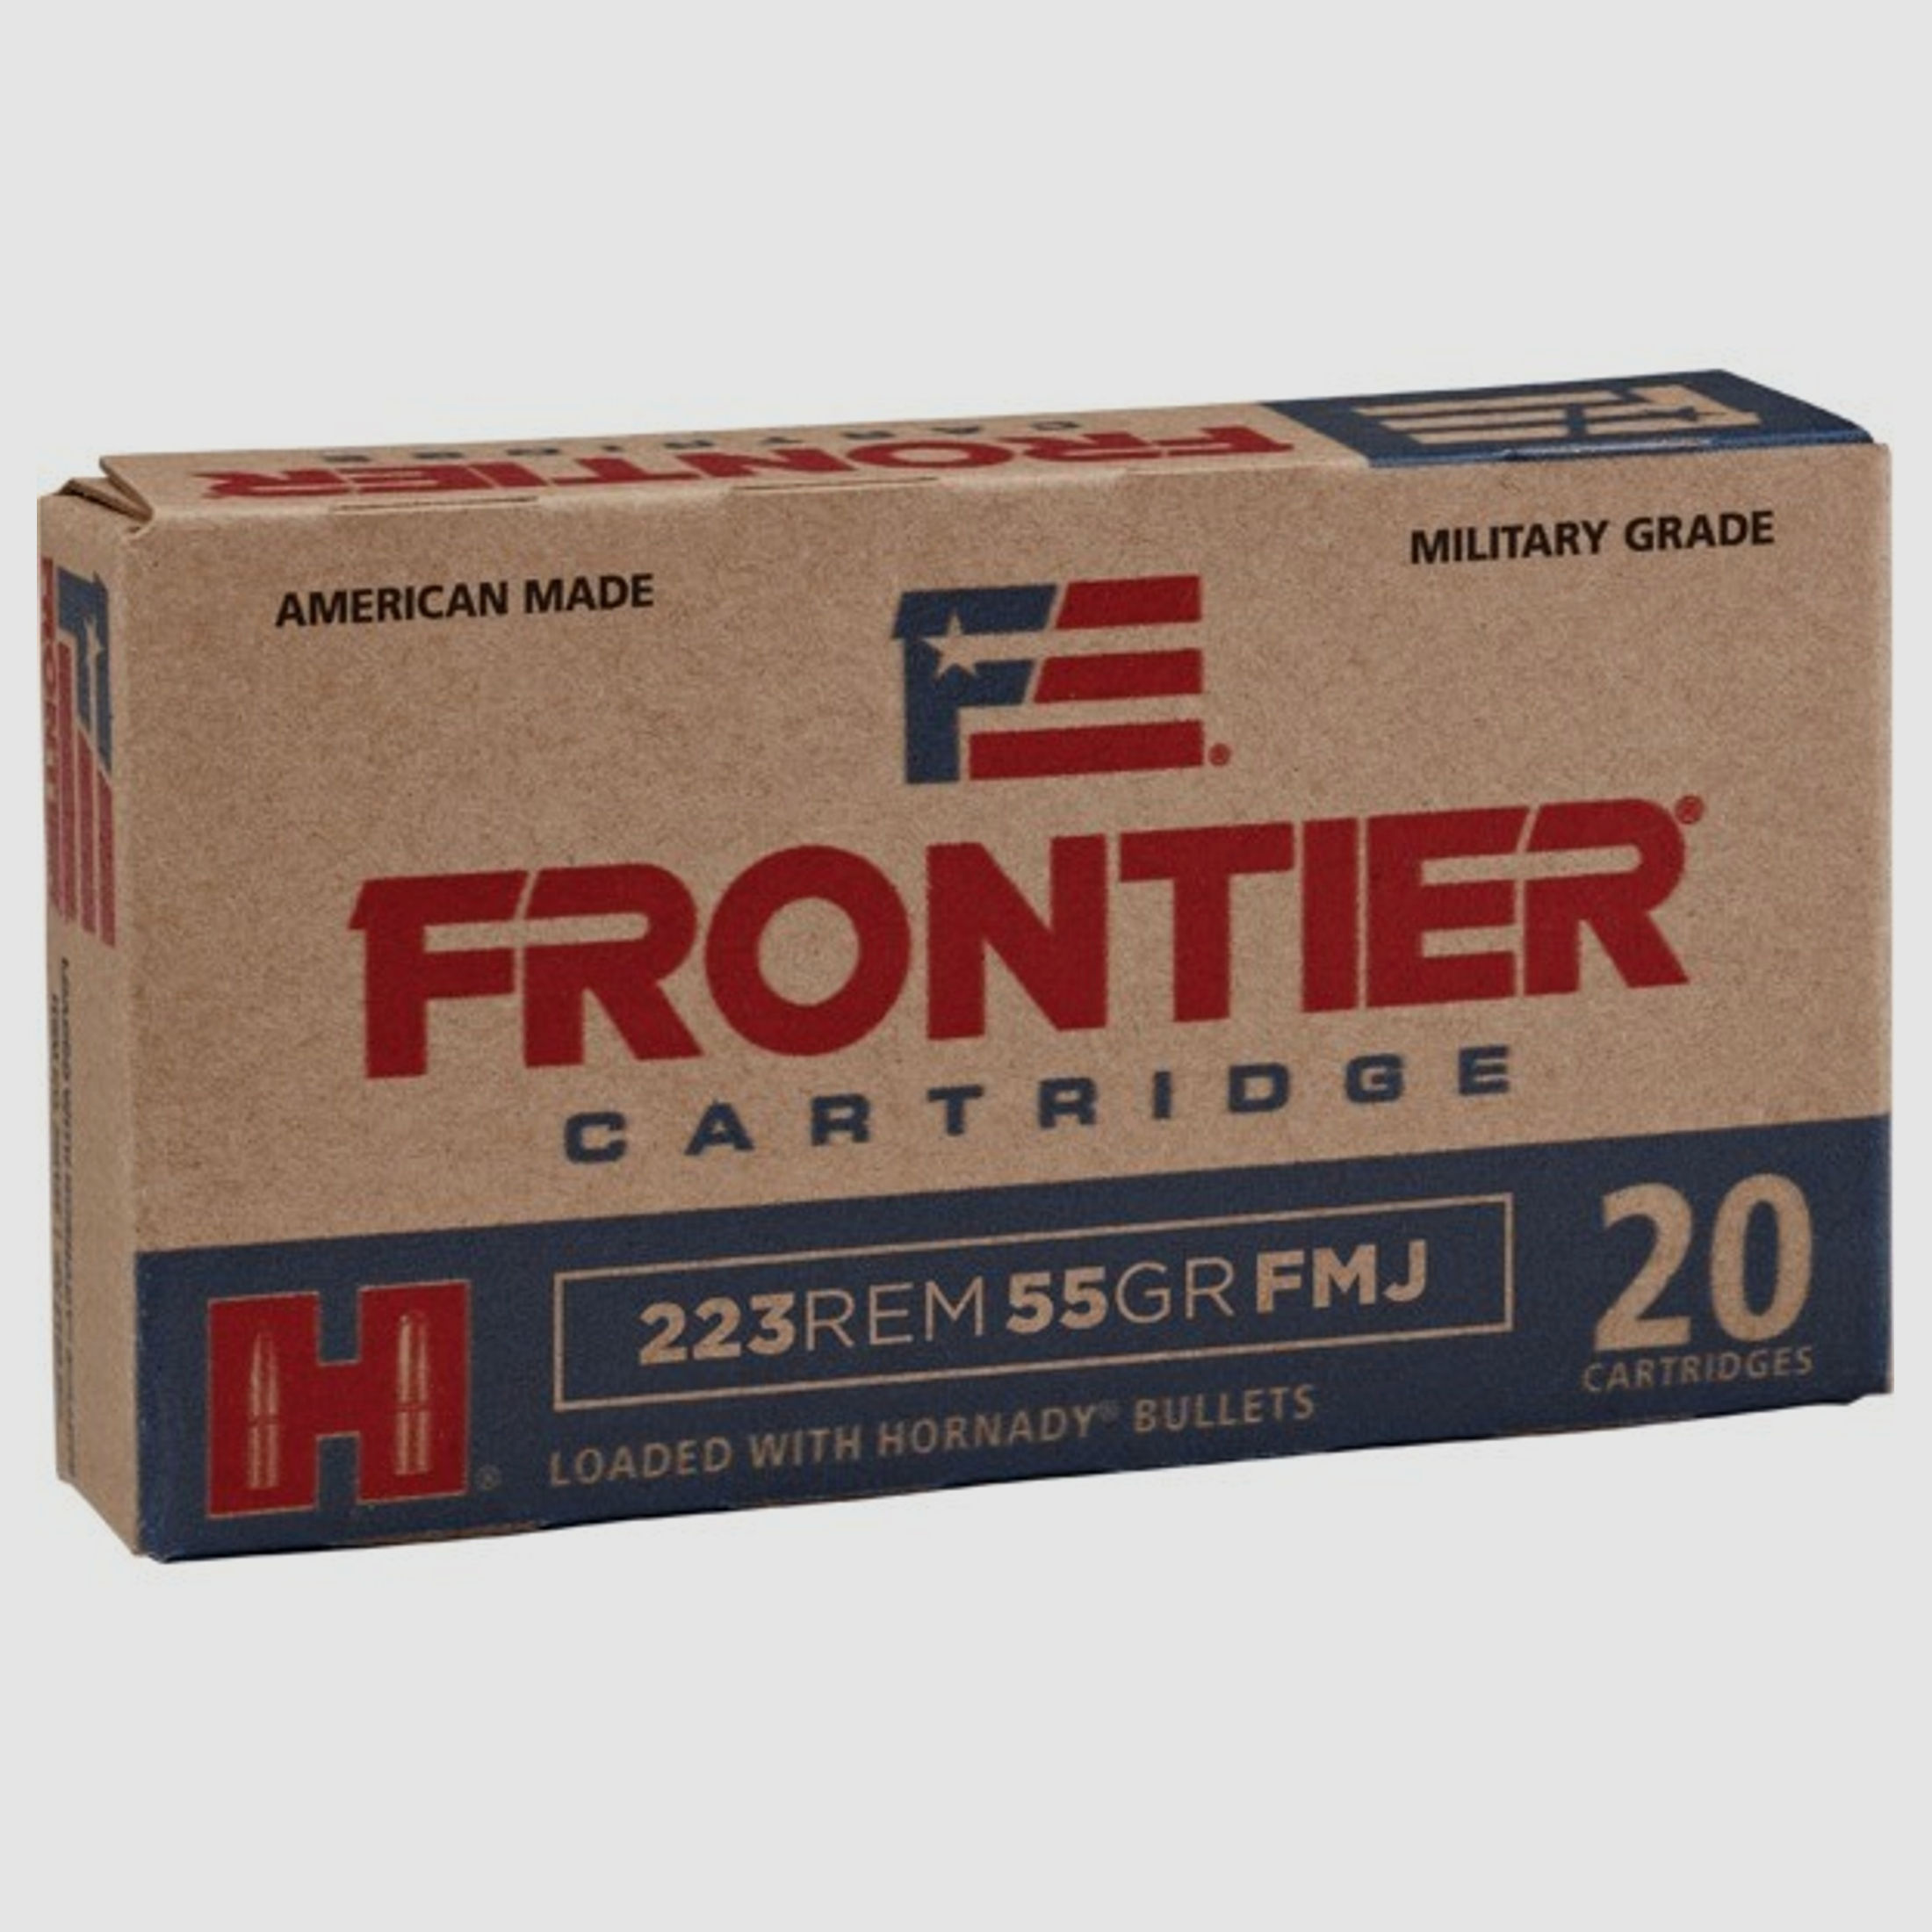 HOR FR160 FRONTIER AMMO .223 REM 68GR BOATTAIL HOLLOW POINT